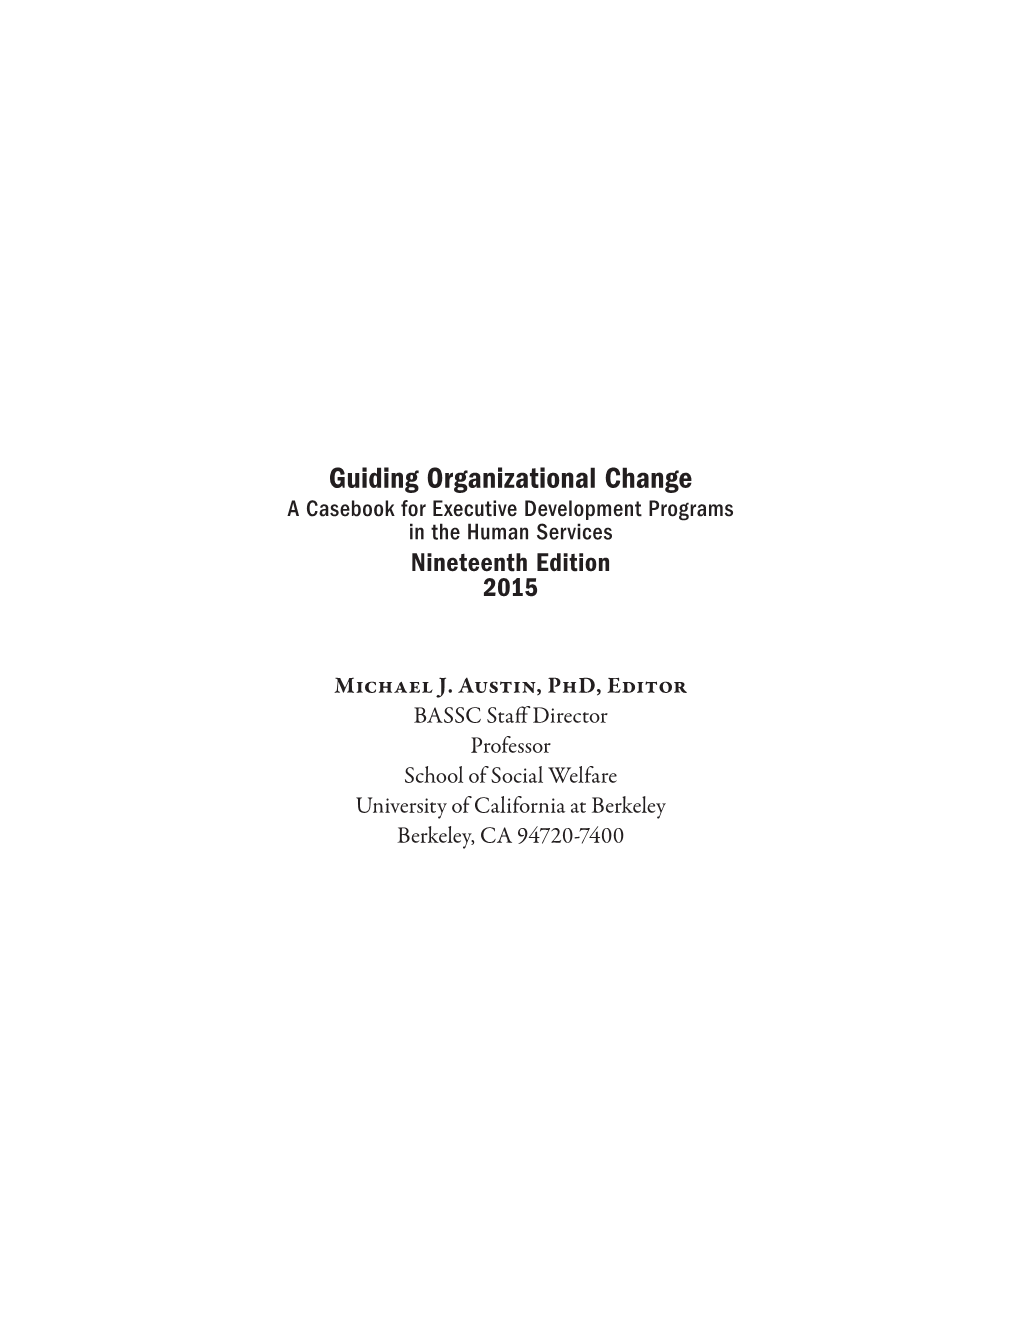 Guiding Organizational Change a Casebook for Executive Development Programs in the Human Services Nineteenth Edition 2015